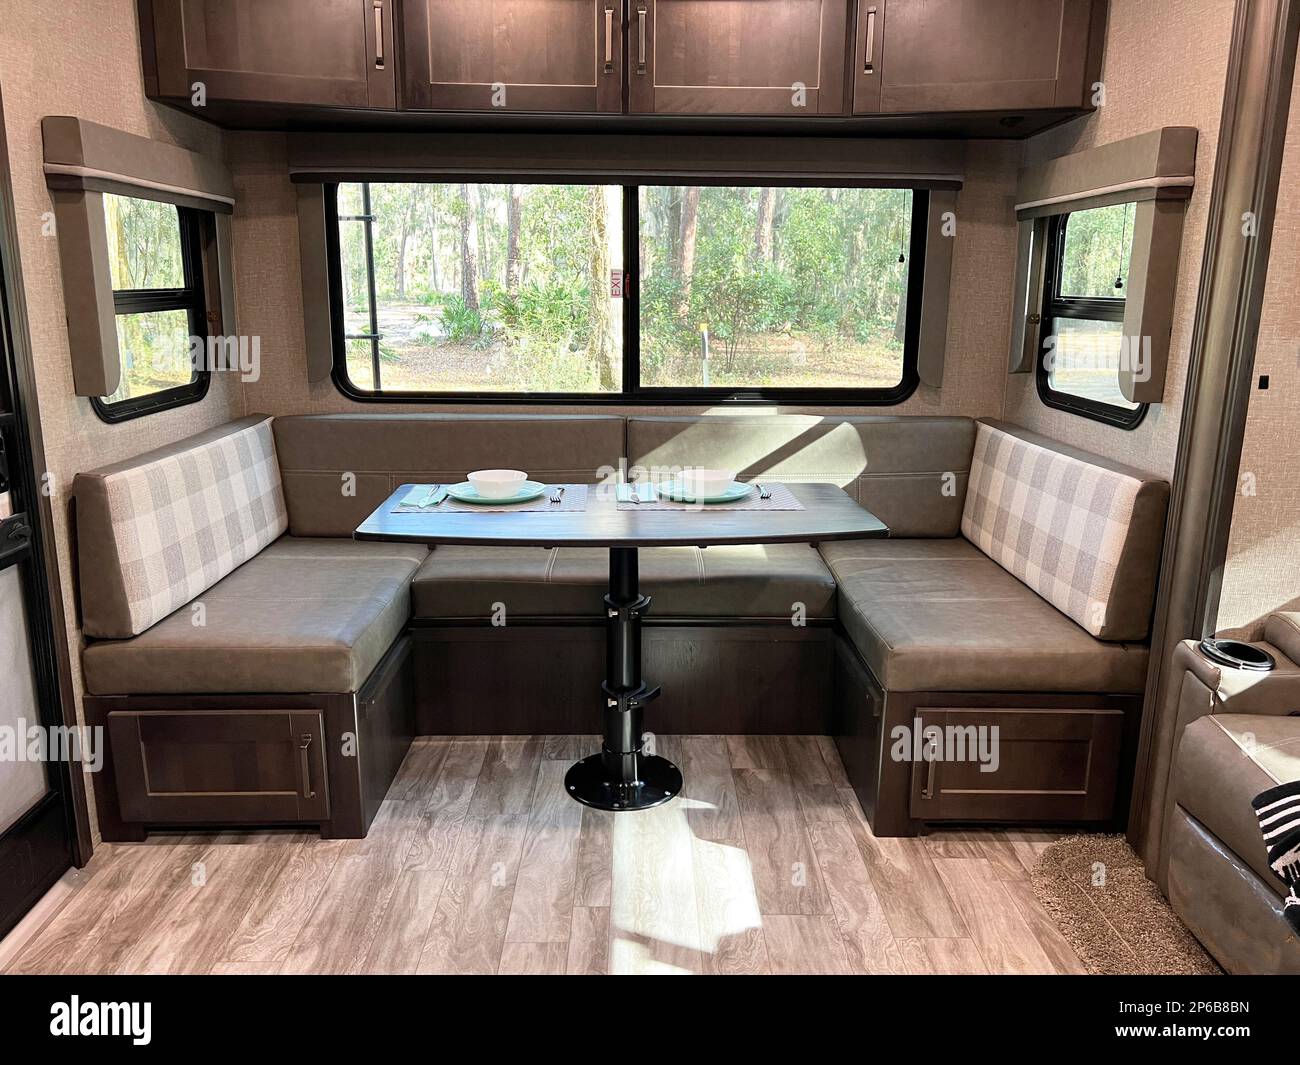 Perfect for remote work, the modern, clean design of this fifth wheel travel trailer shows the dining area with storage and a huge picture window. Stock Photo